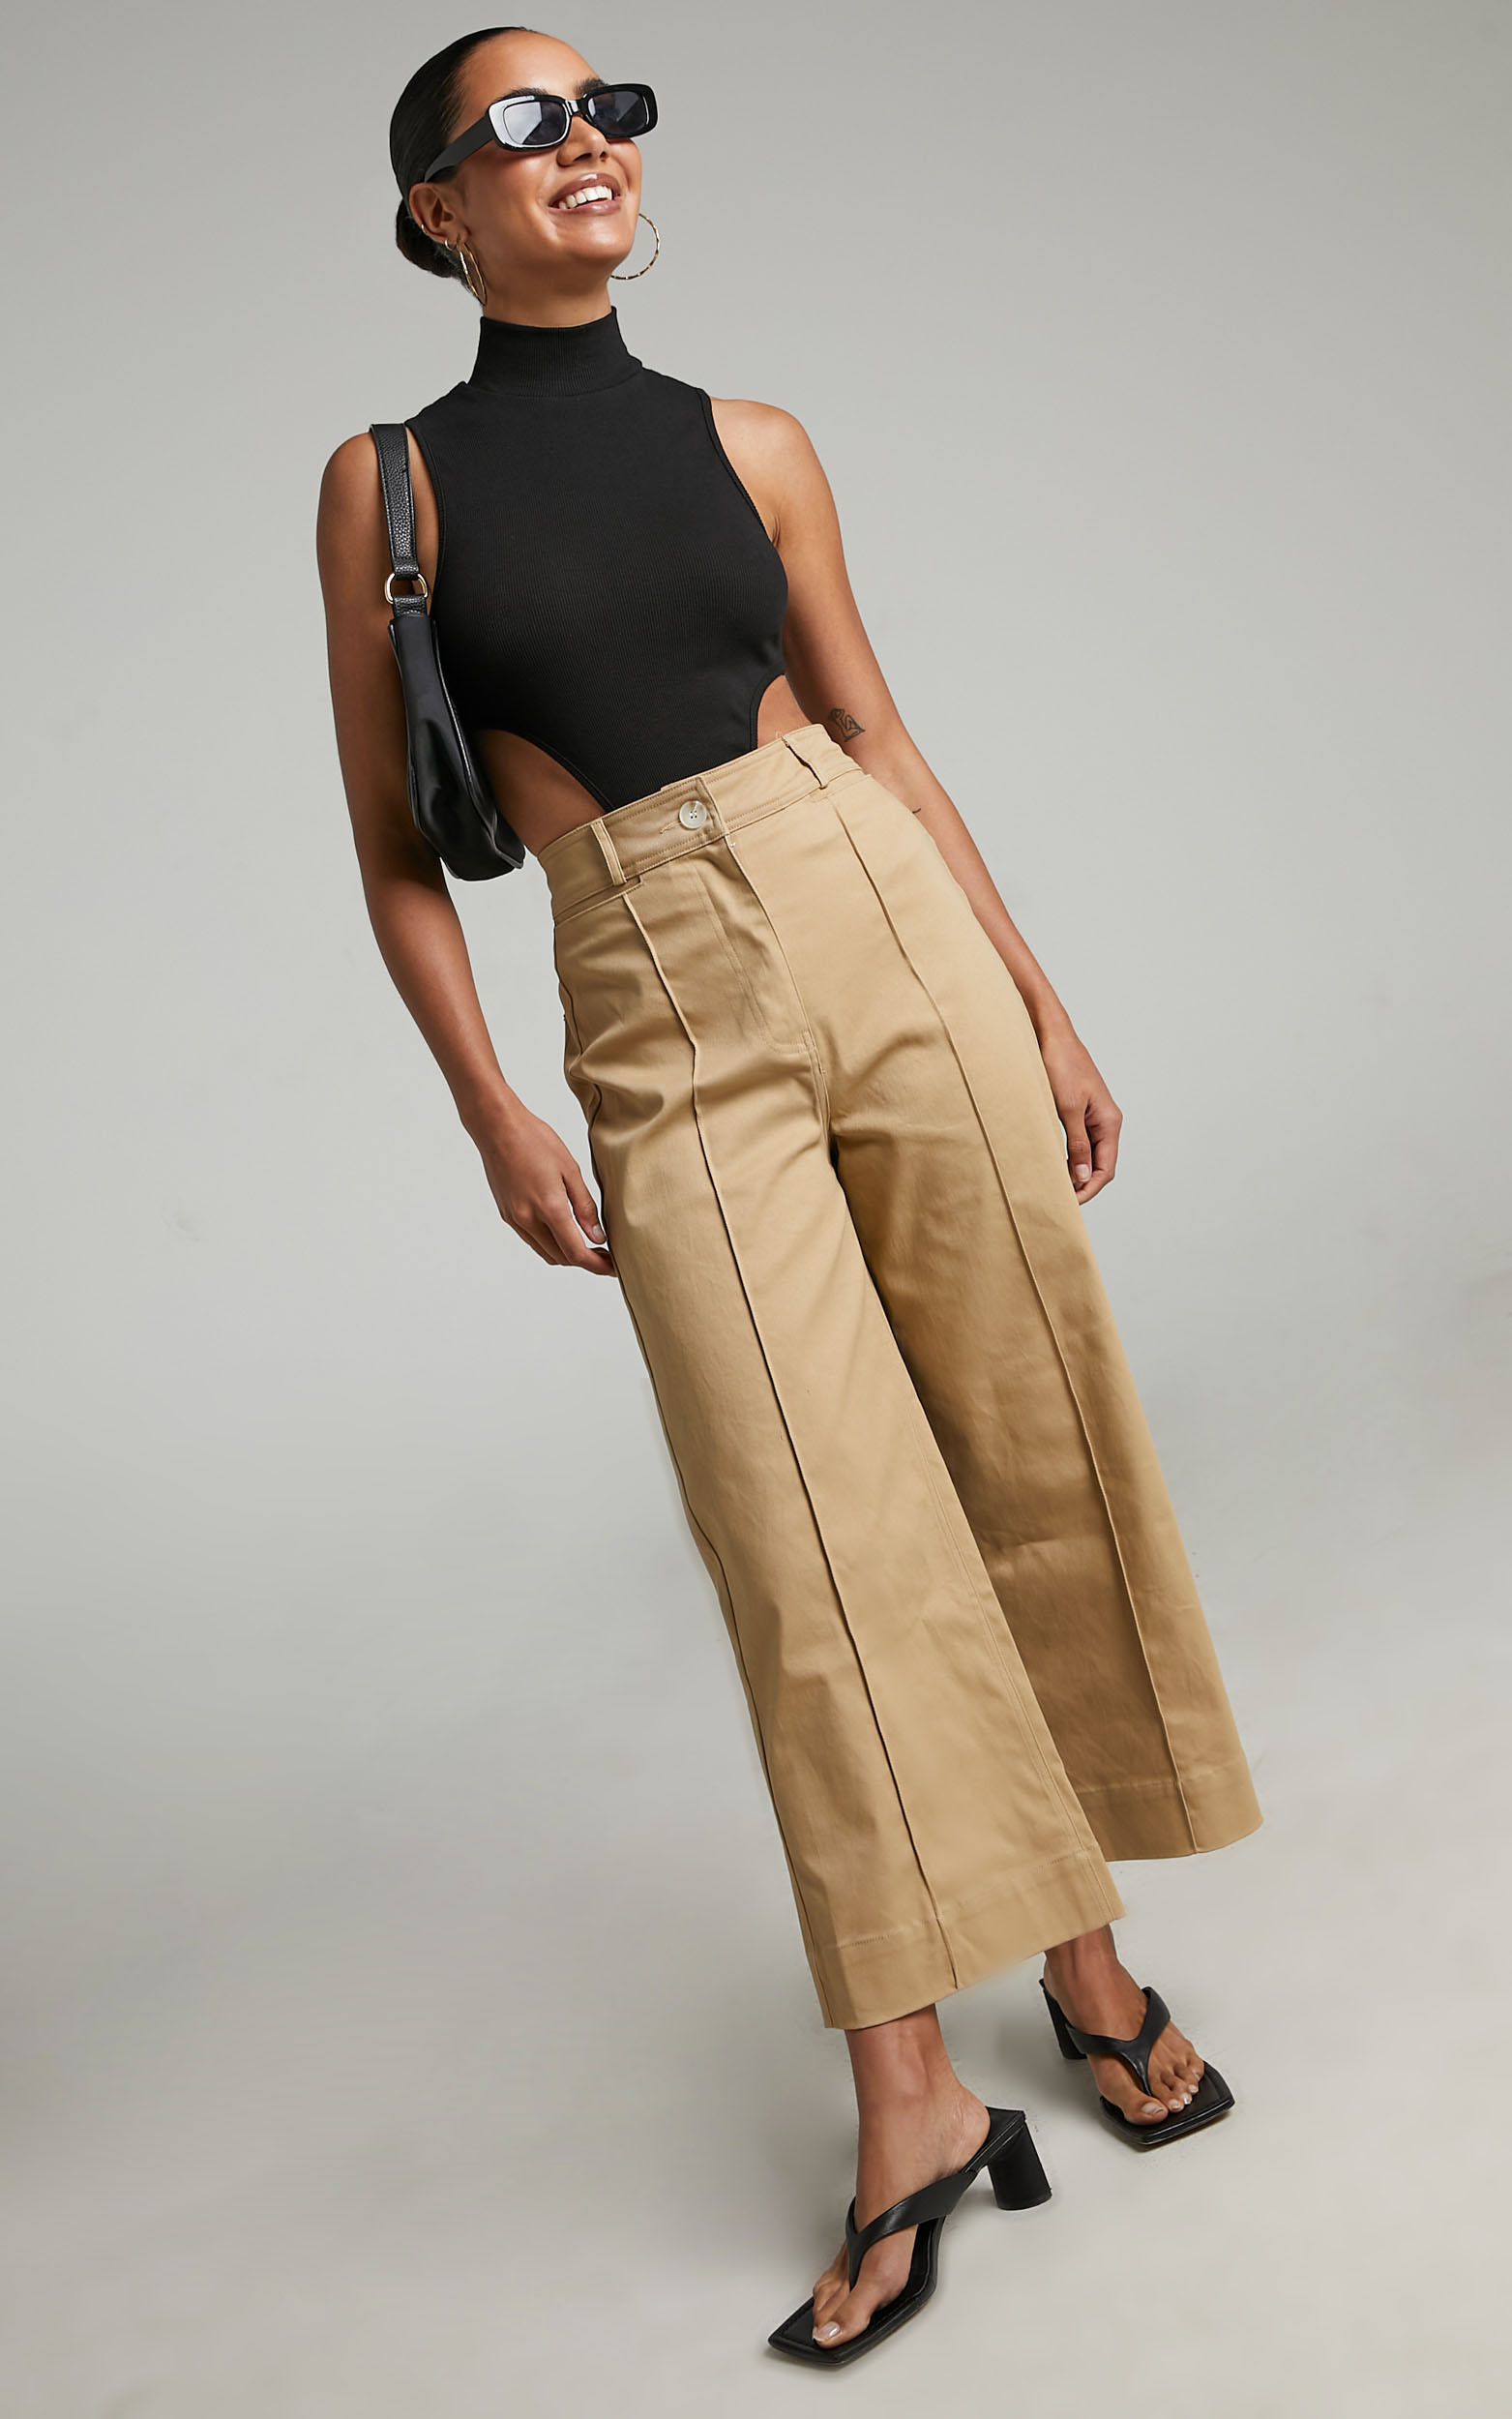 Katryna Pin Tuck Wide Leg Pants in Camel - 06, BRN1, hi-res image number null